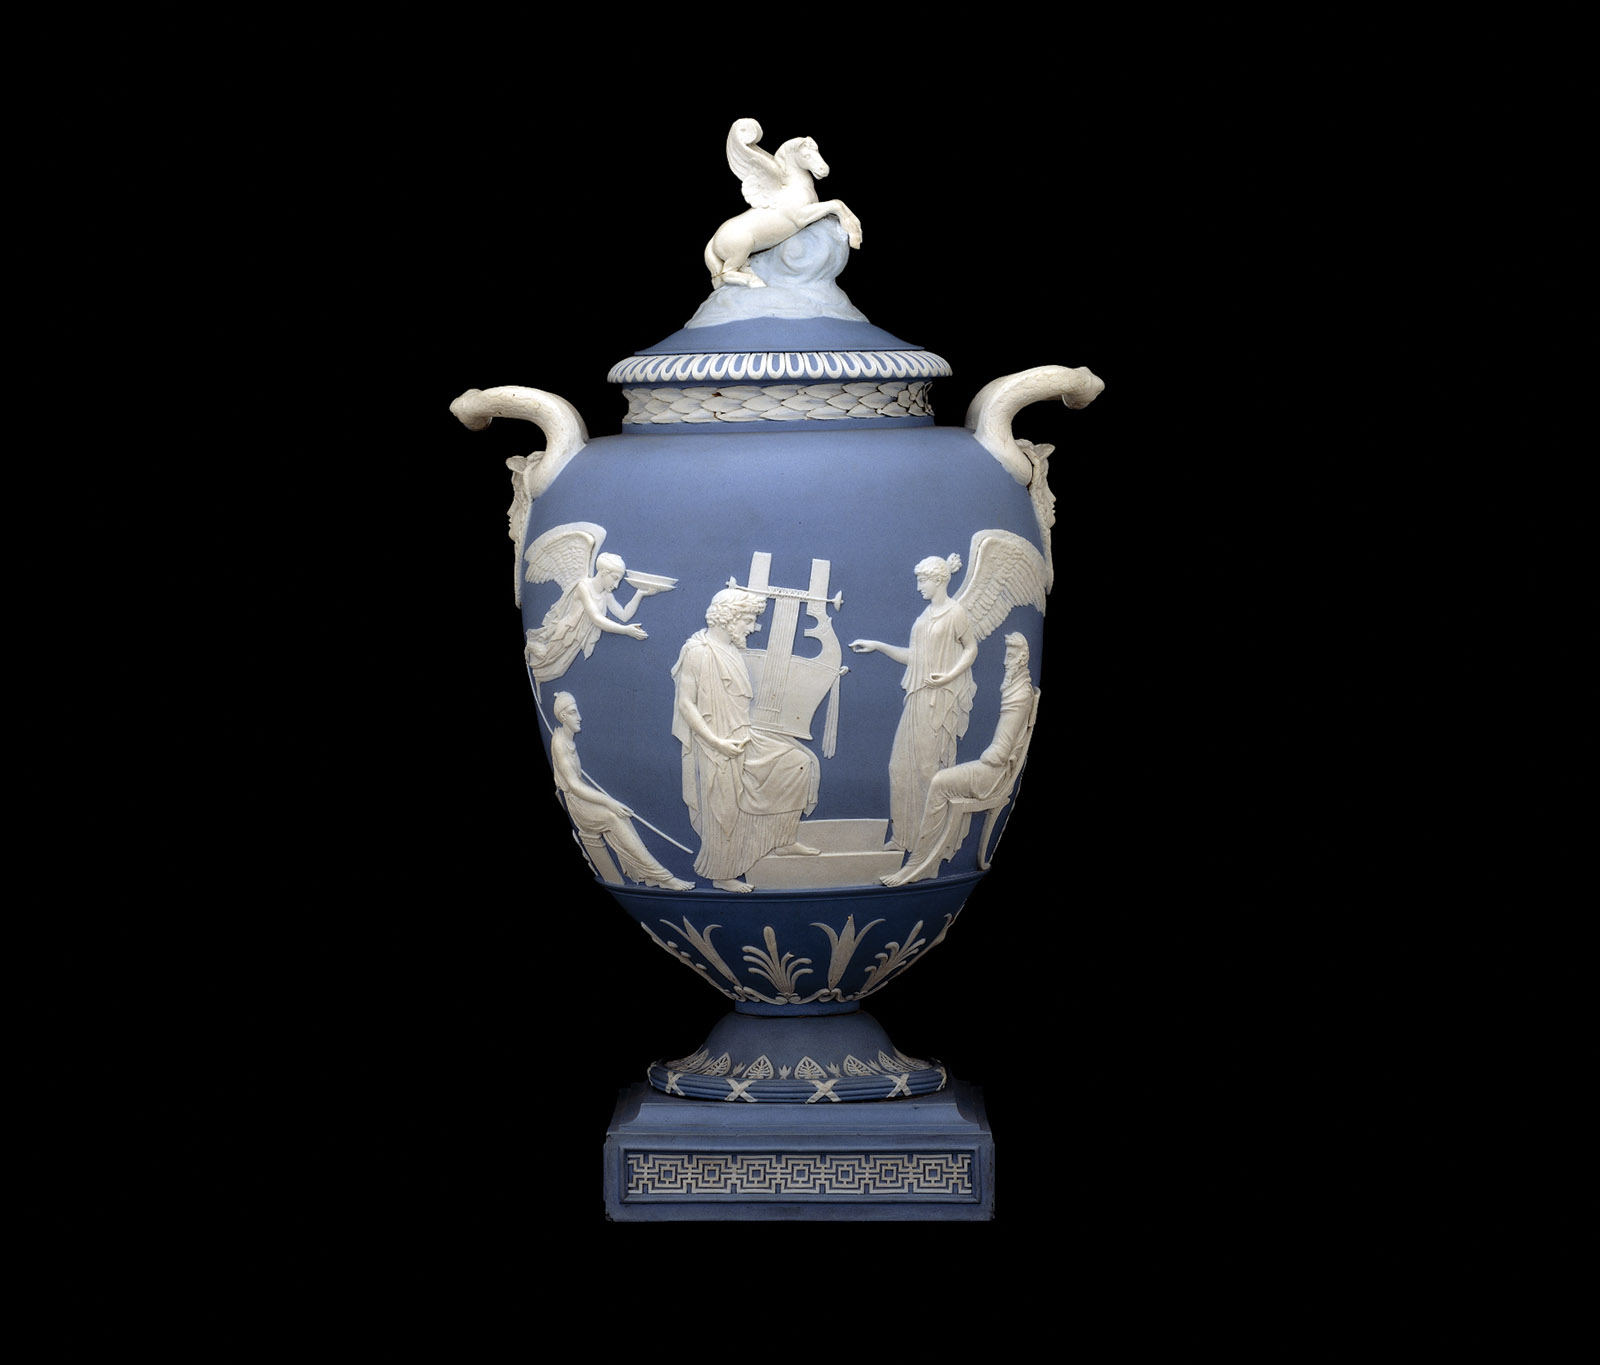 Apotheosis of Homer, or the Pegasus Vase; jasperware vase produced by the Wedgwood factory